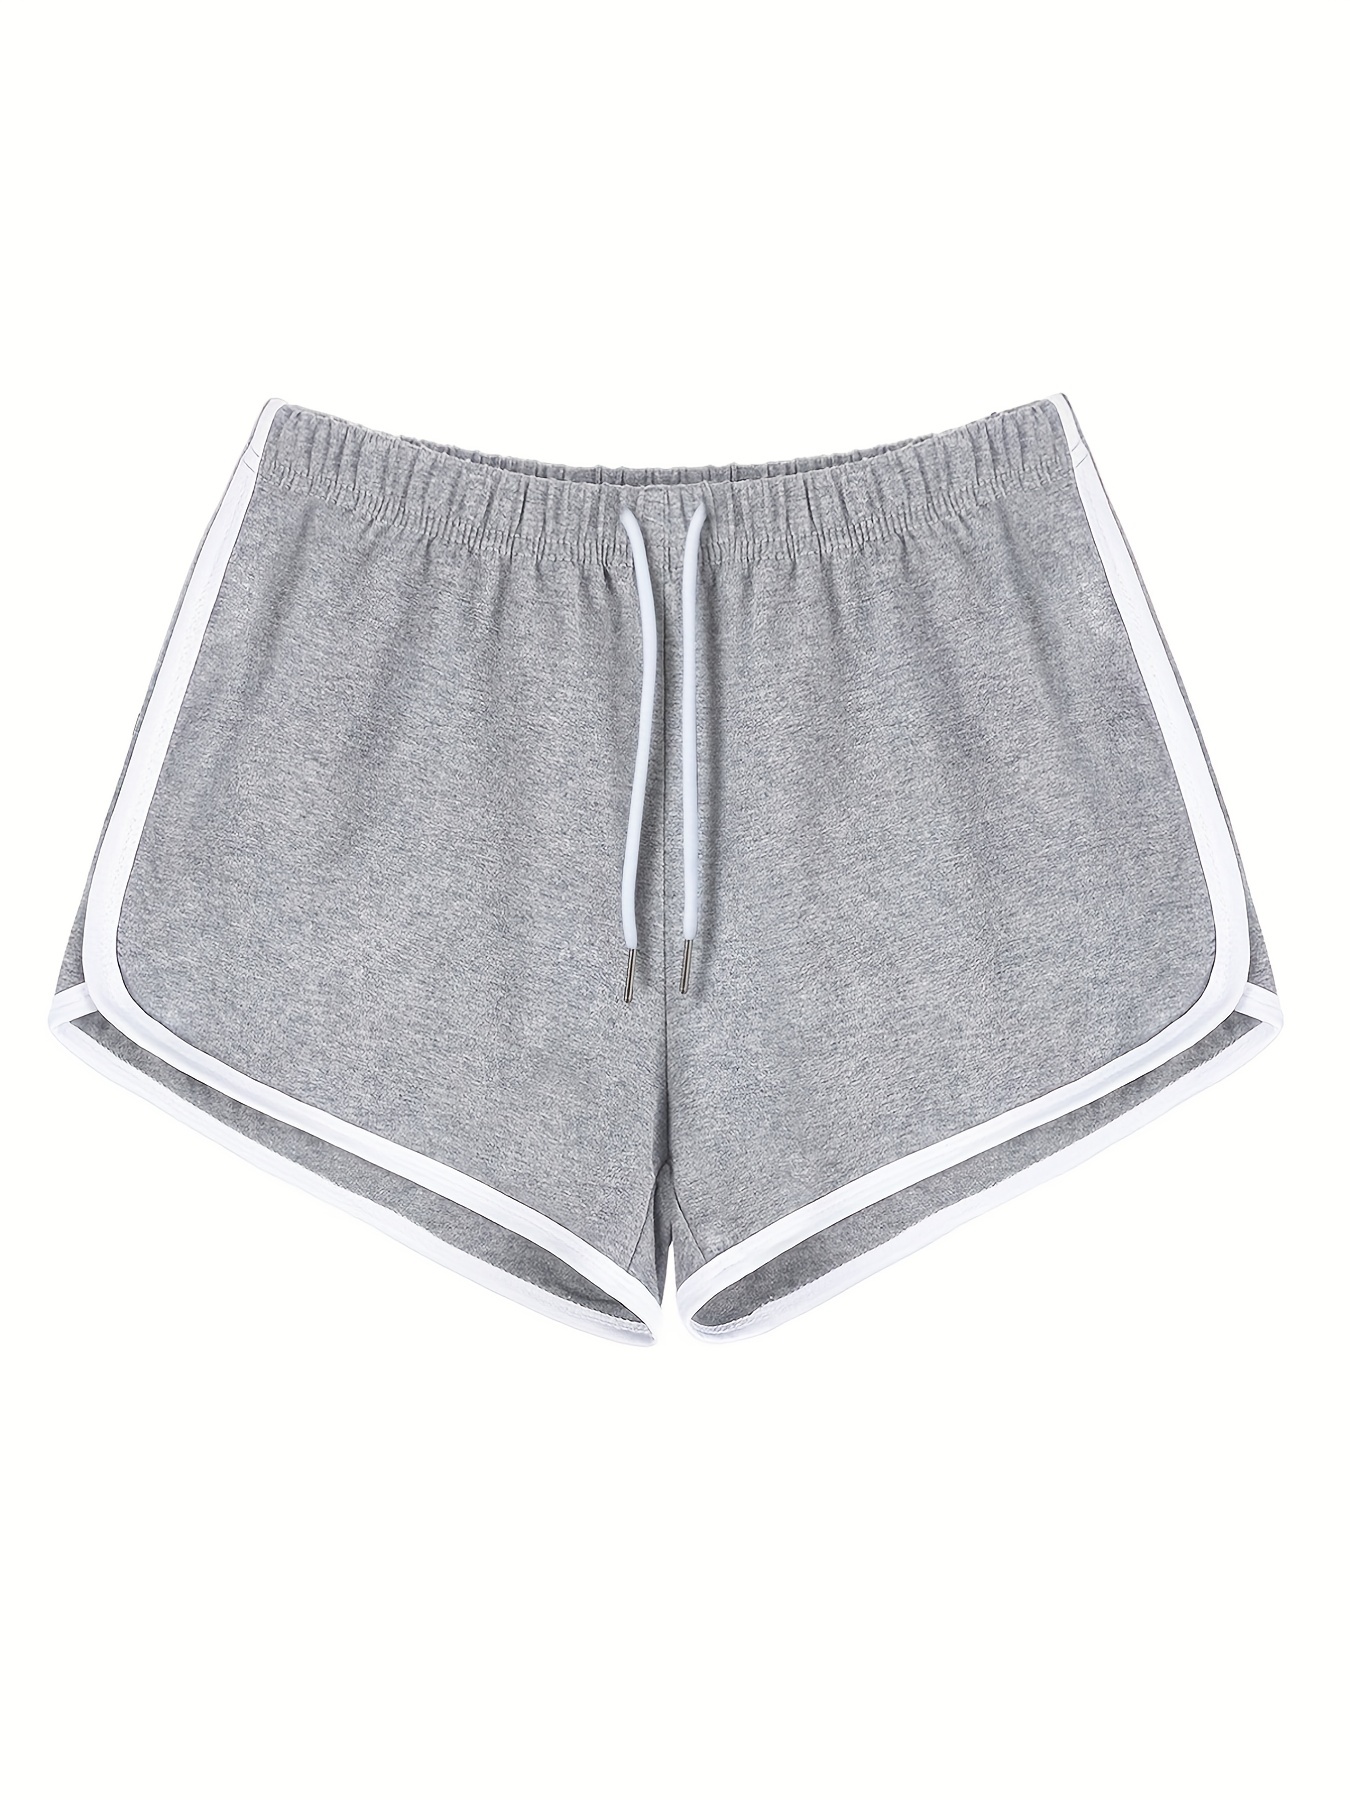 High Quality Designer Womens Loose Yoga Shorts Women With Zipper Pocket  Quick Dry, Breathable, And Loose Fit For Gym And Training From Lazylace,  $19.9